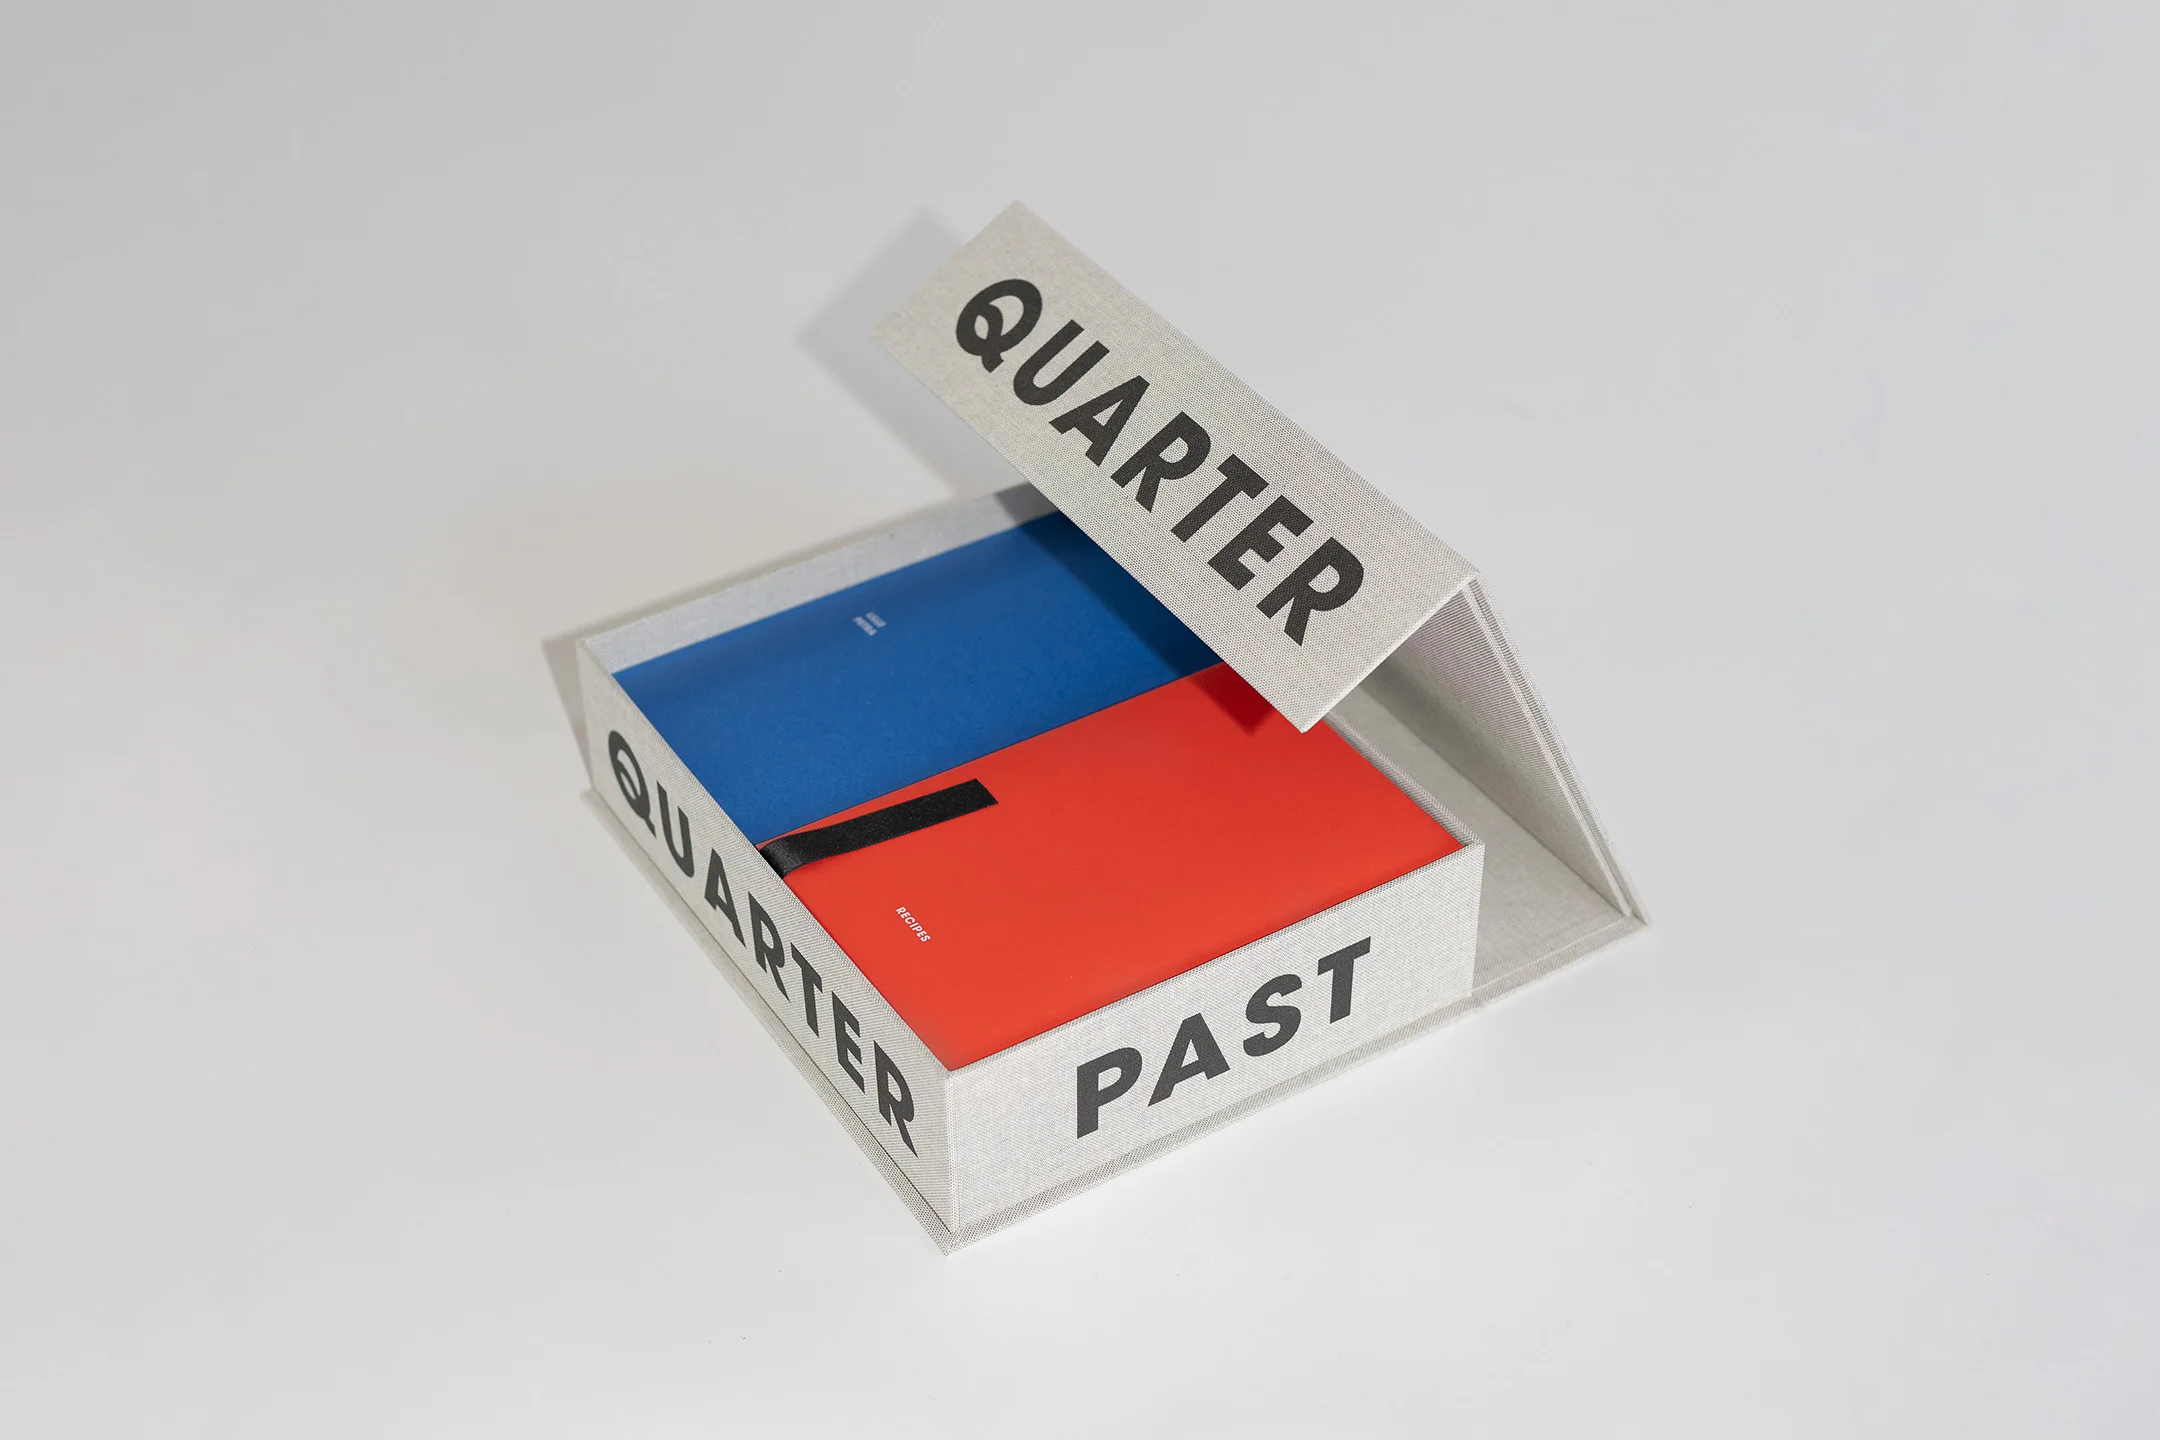 Quarter Past Noon – a compendium by &Tradition